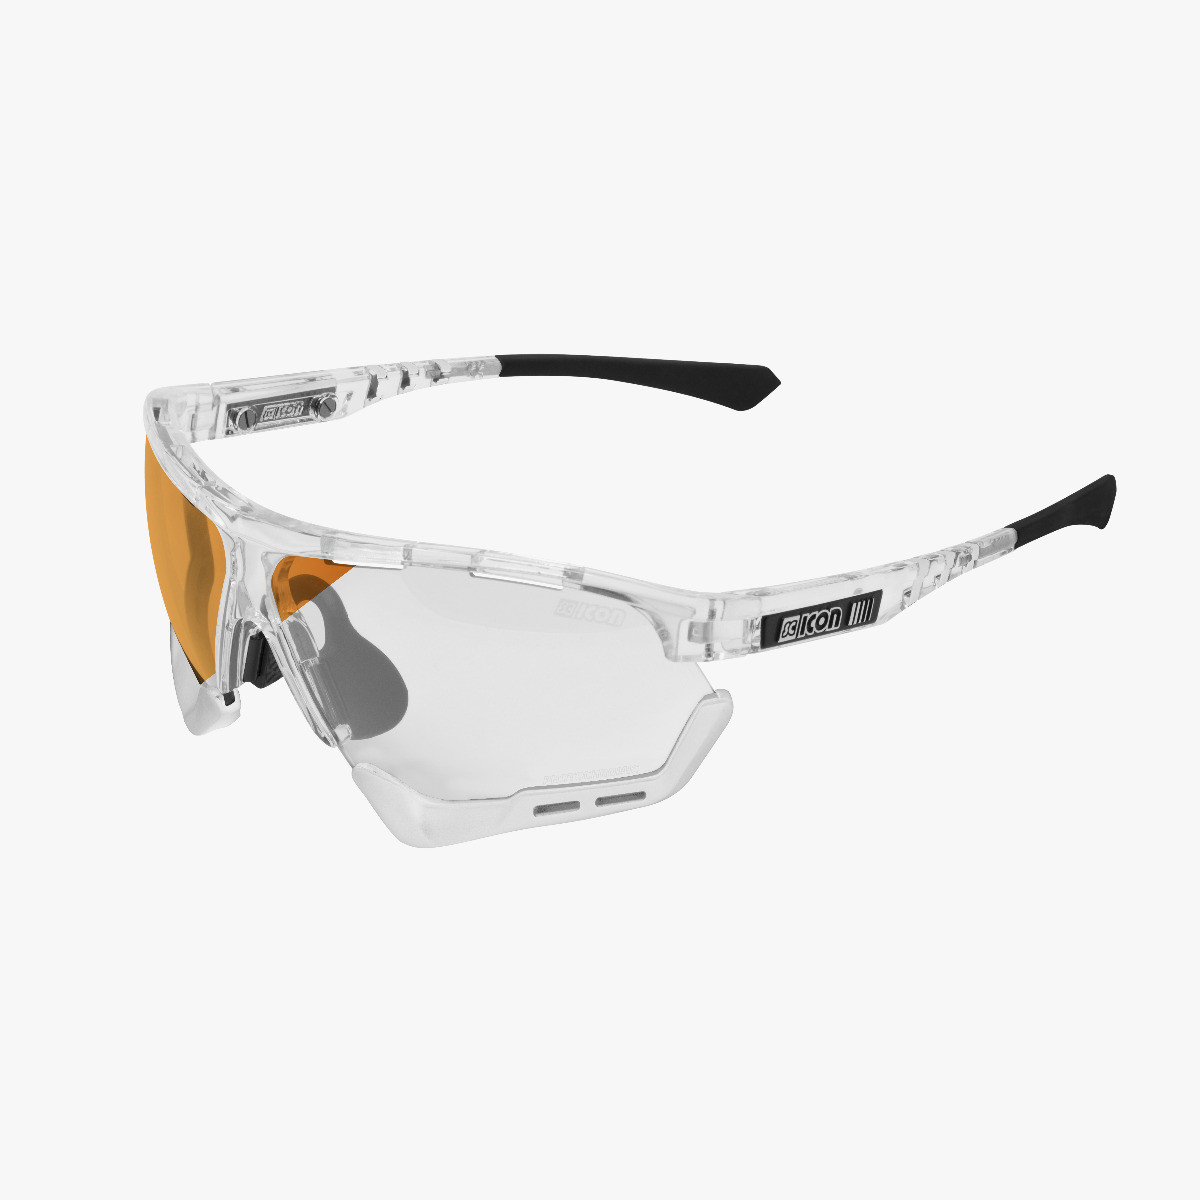 Scicon Sports | Aerocomfort Sport Cycling Performance Sunglasses - Crystal Gloss / Photocromatic Bronze - EY15170701
